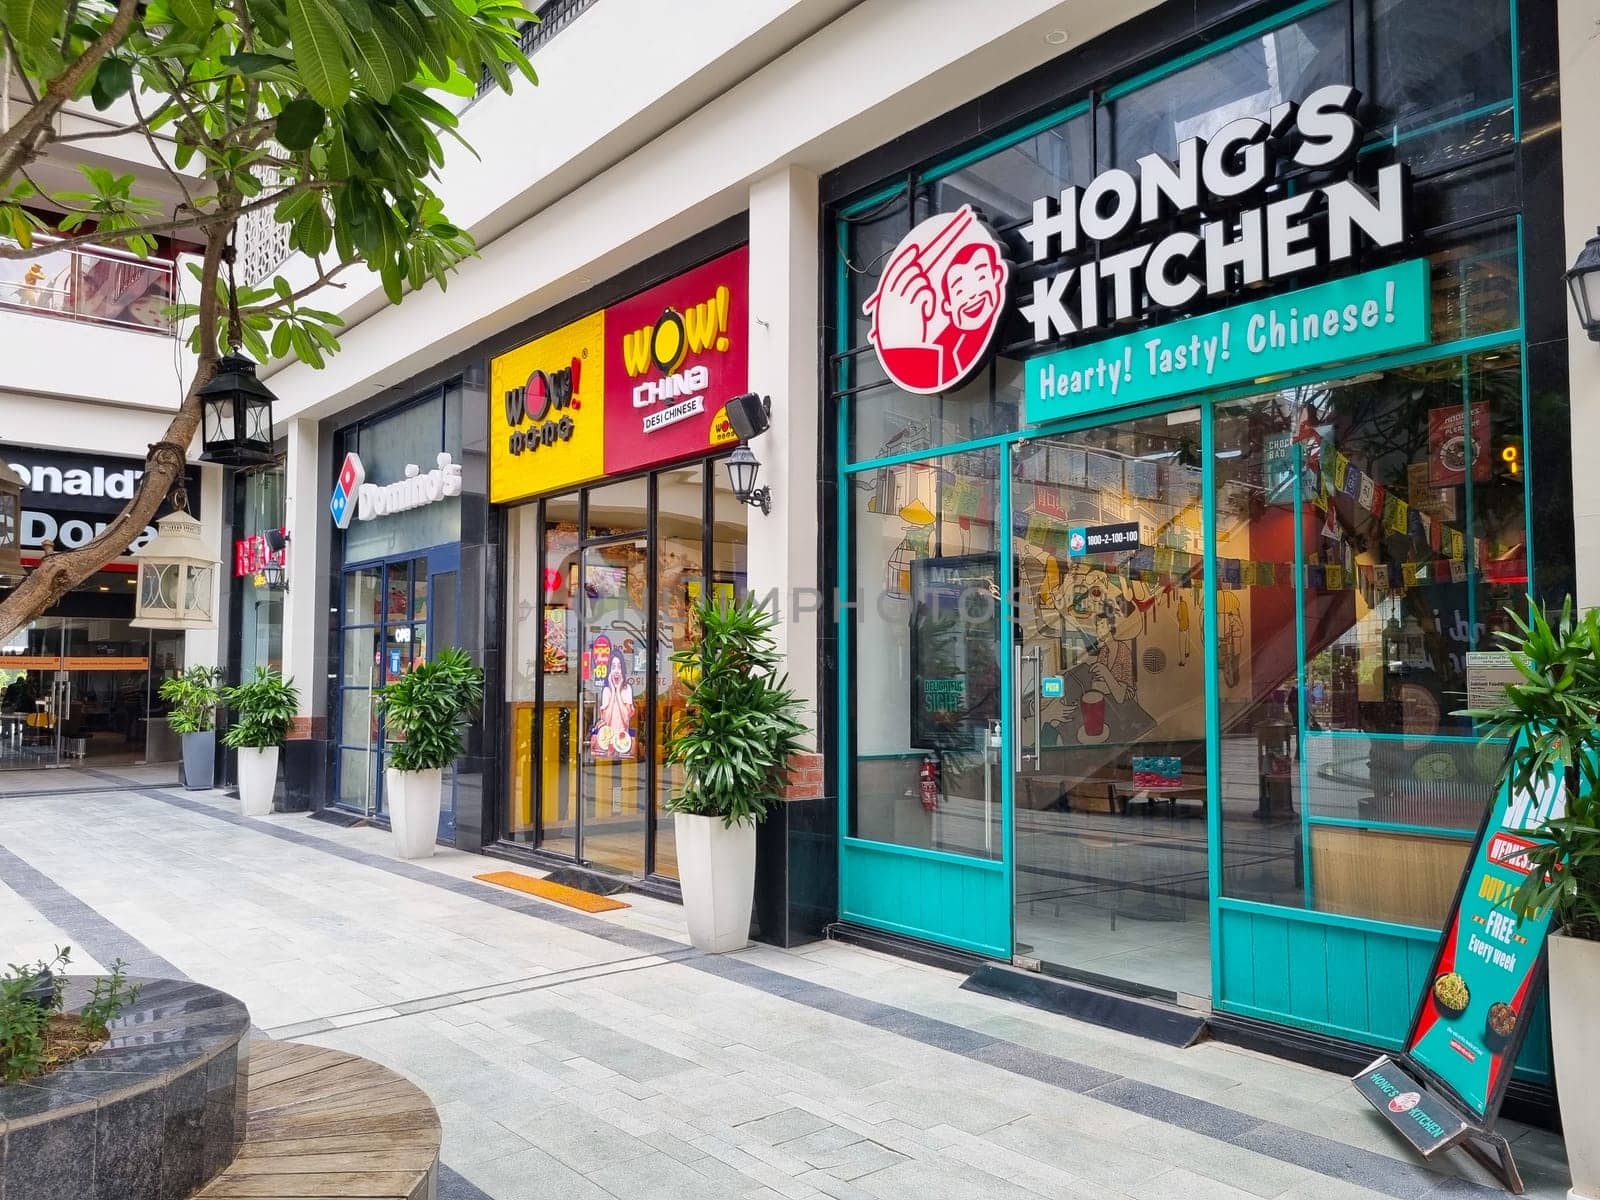 Three franchise offerings from Jubilant food works starup with cafes and home delivery of Wow Momos, Hongs Kitchen and Dominos by Shalinimathur